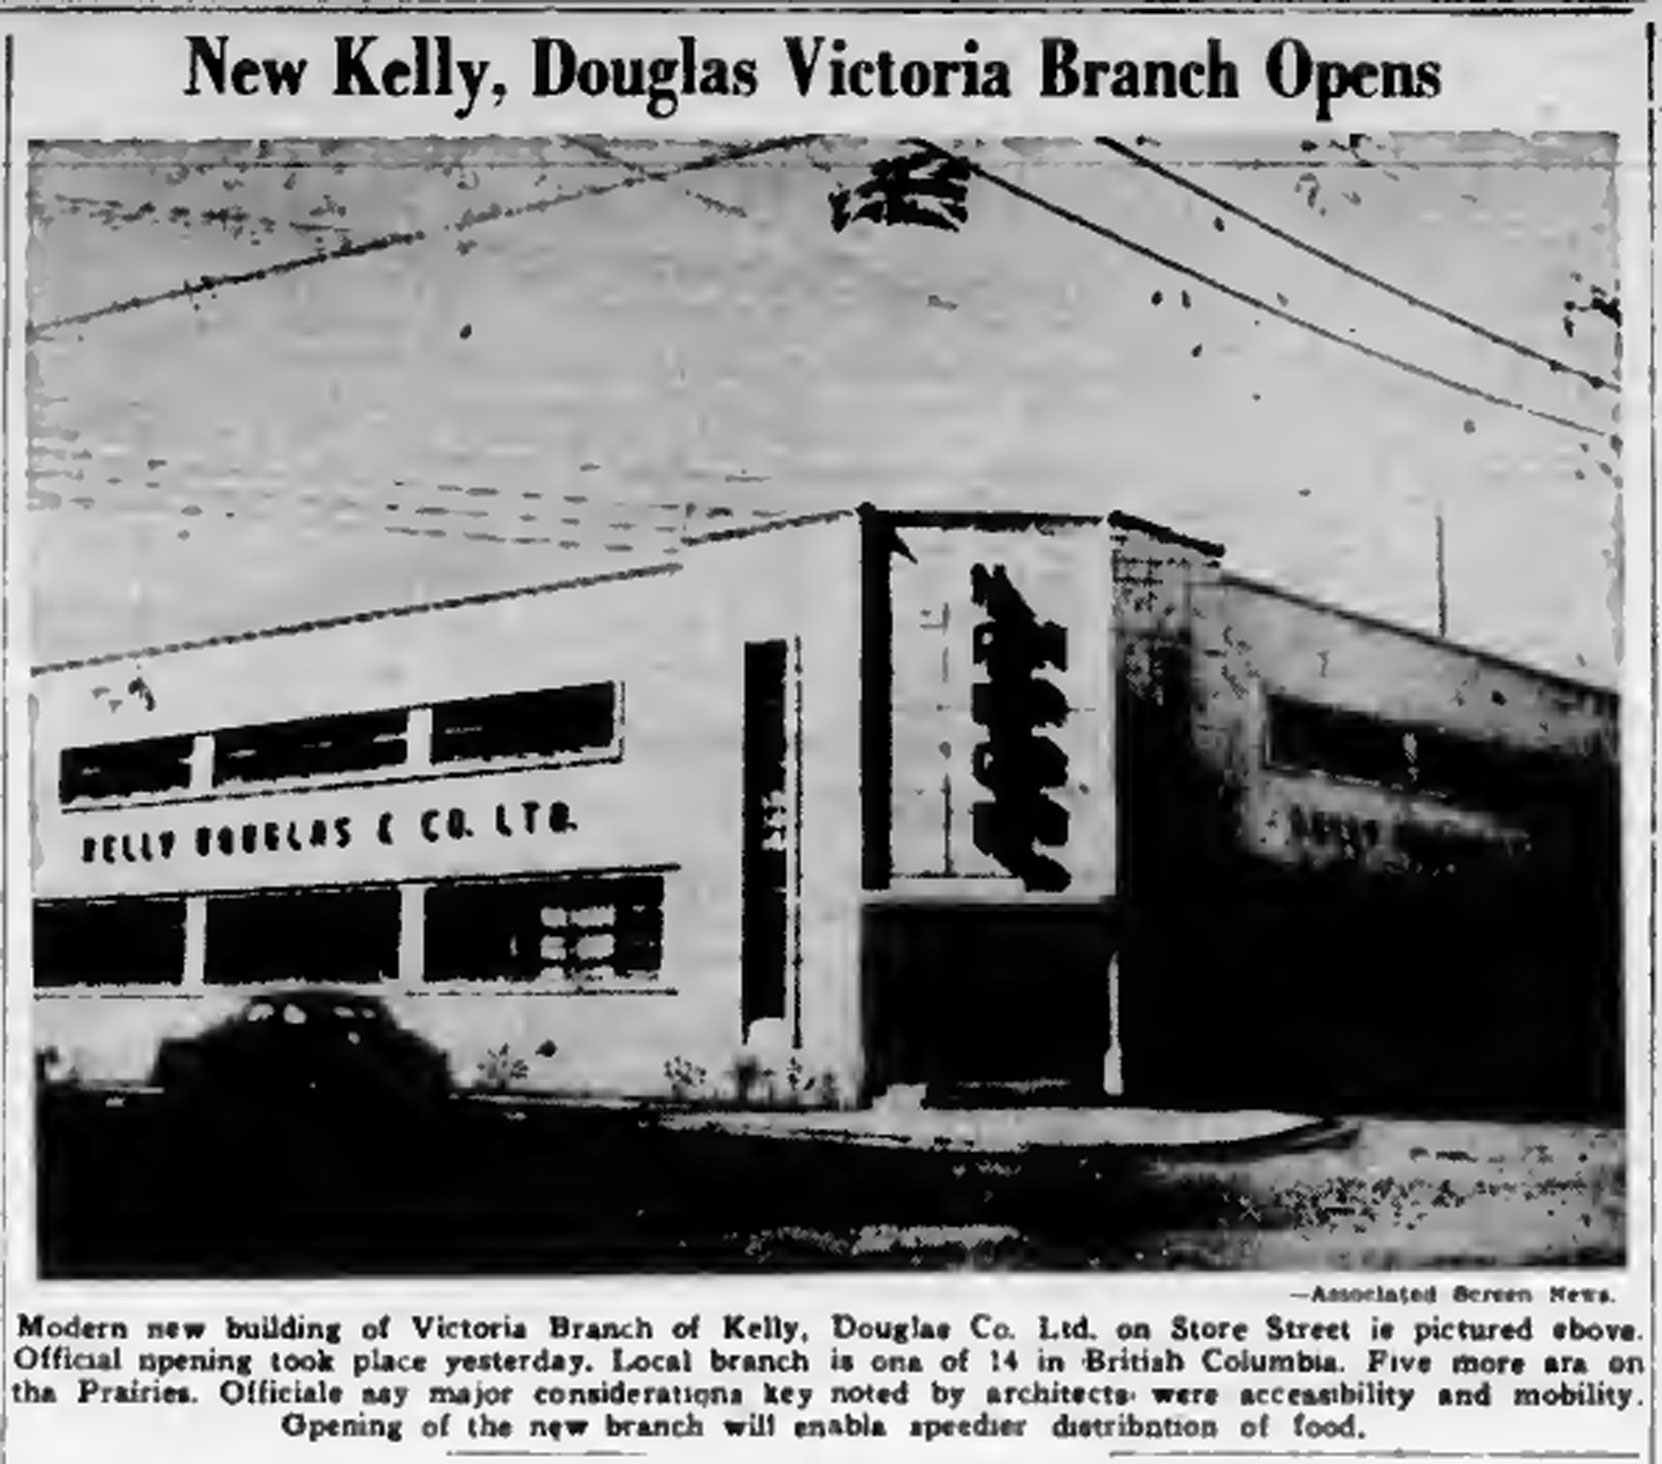 1947 newspaper photo of the then newly opened Kelly Douglas & Co. Ltd. office and warehouse at 1810 Store Street.